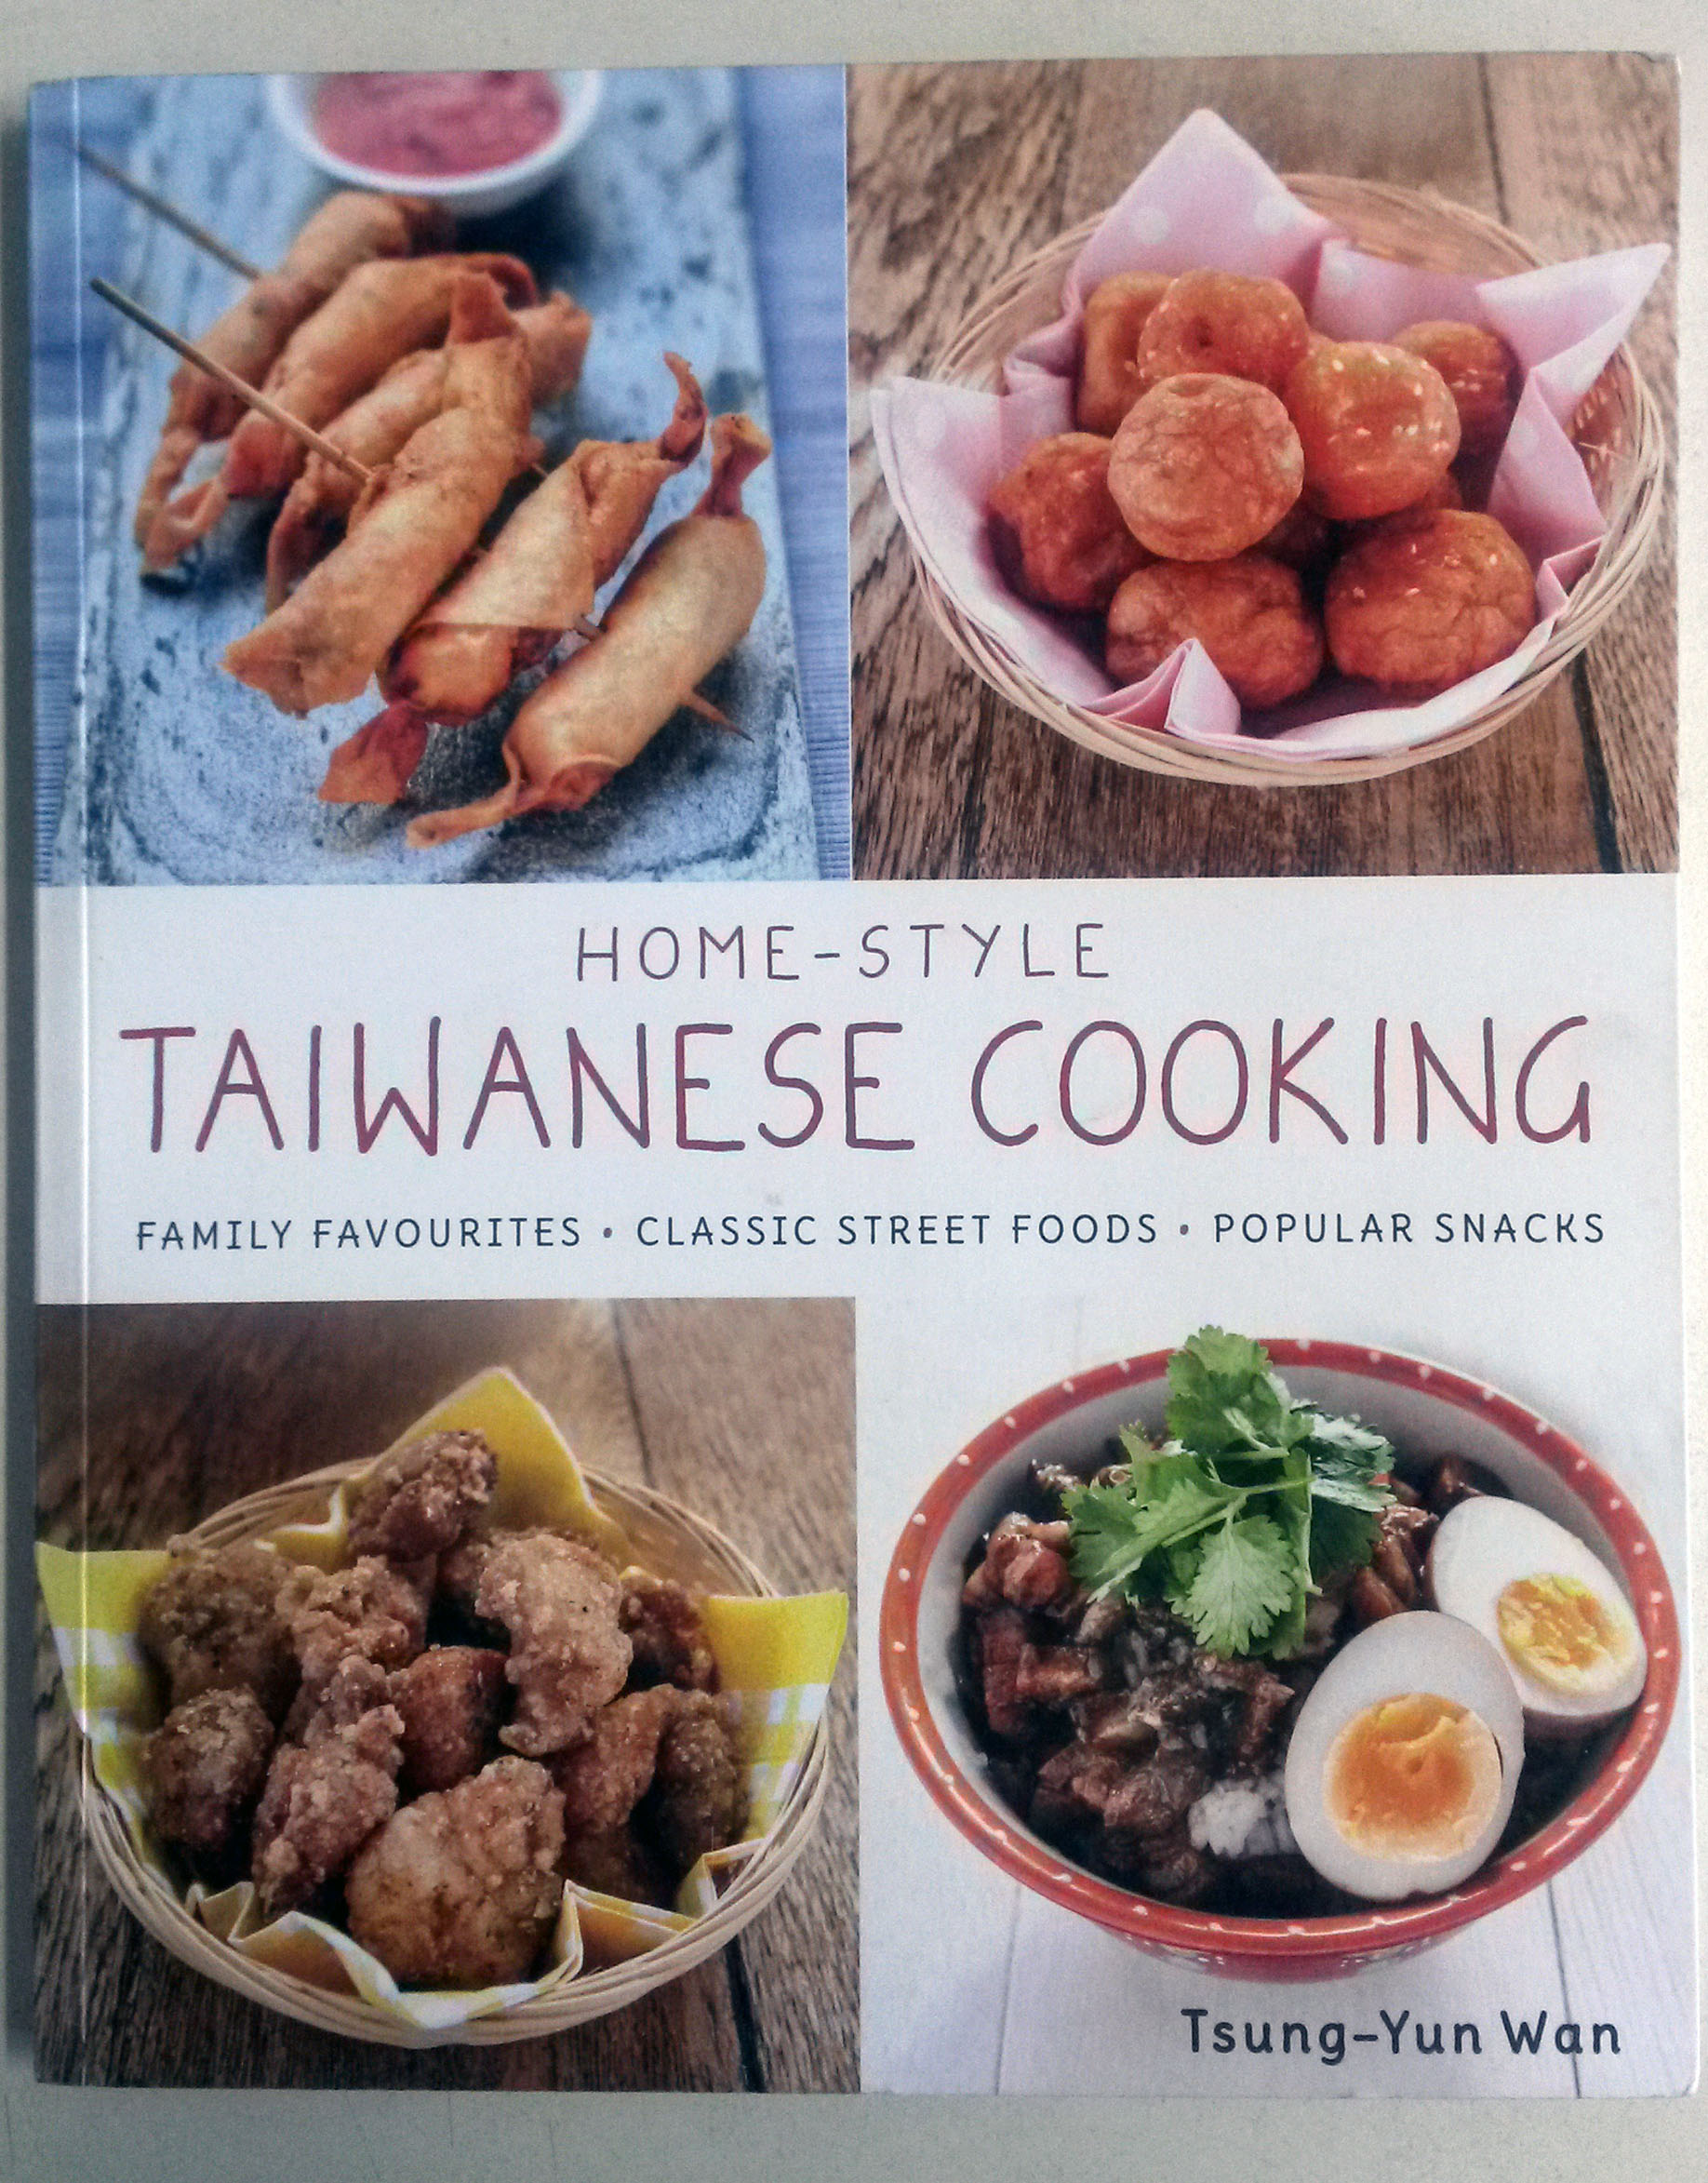 Home-Style Taiwanese Cooking by Tsung-Yun Wan